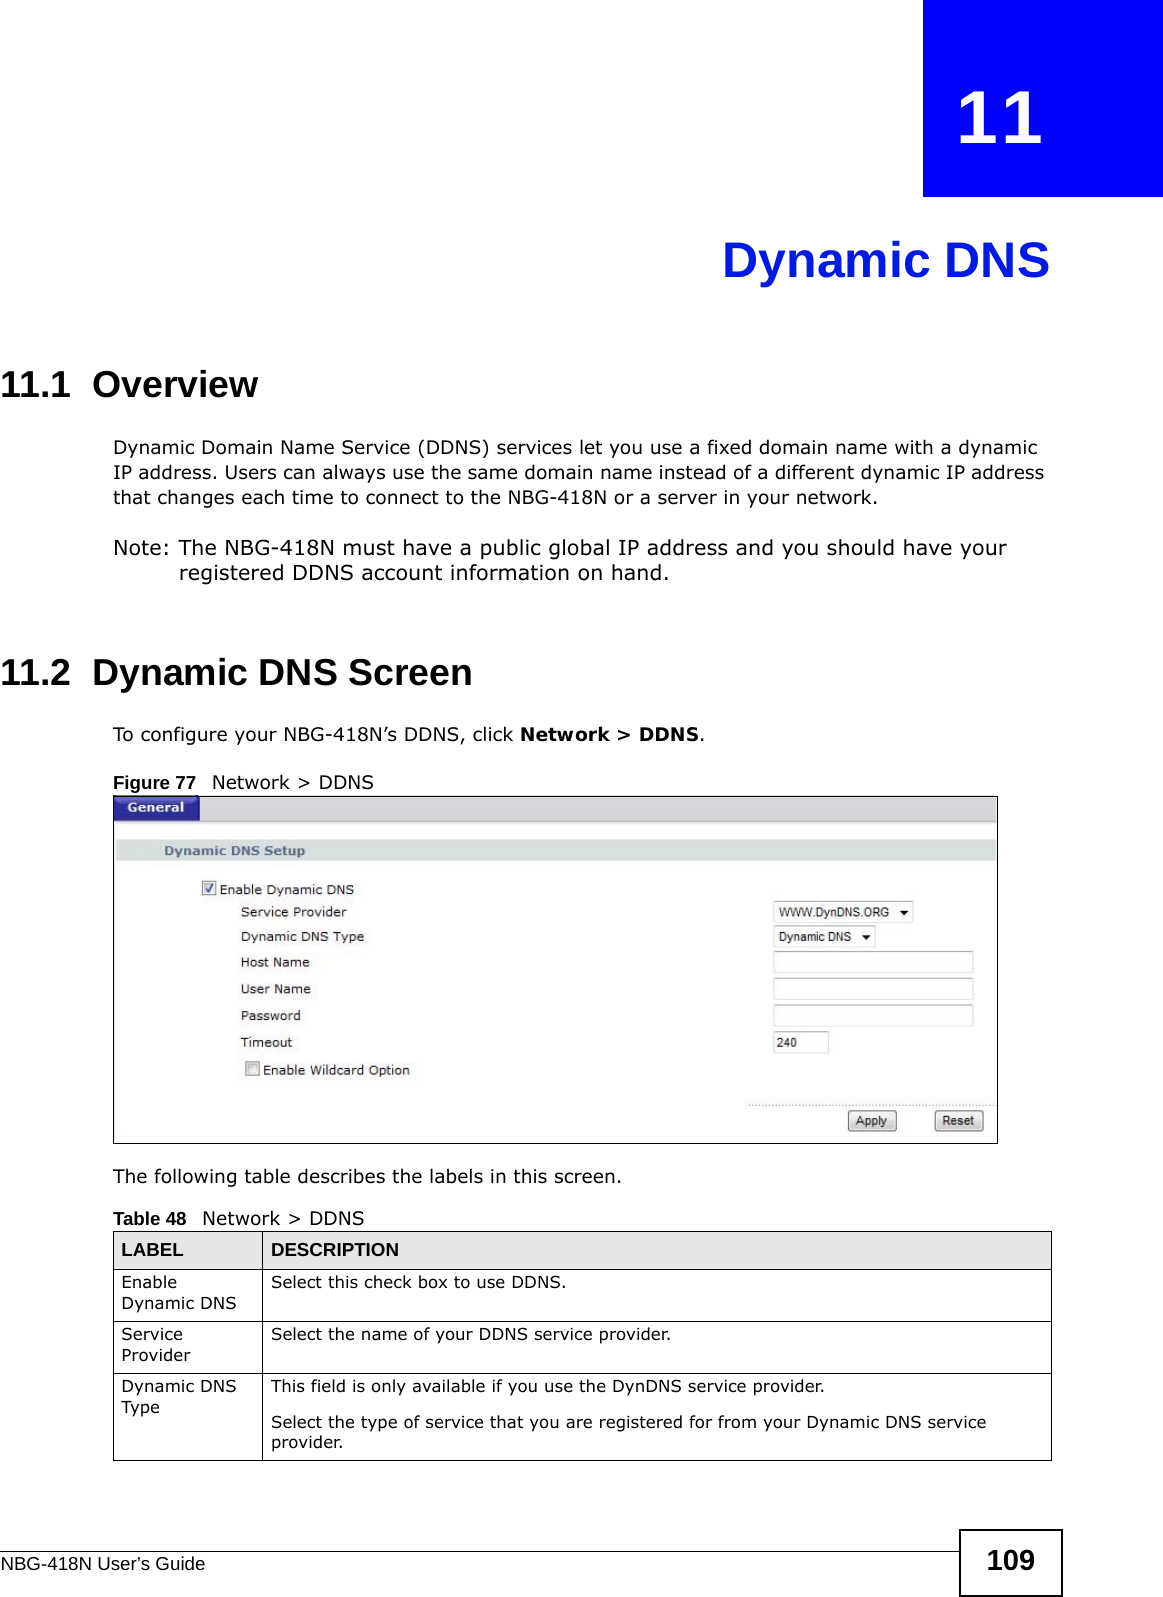 NBG-418N User’s Guide 109CHAPTER   11Dynamic DNS11.1  Overview Dynamic Domain Name Service (DDNS) services let you use a fixed domain name with a dynamic IP address. Users can always use the same domain name instead of a different dynamic IP address that changes each time to connect to the NBG-418N or a server in your network.Note: The NBG-418N must have a public global IP address and you should have your registered DDNS account information on hand.11.2  Dynamic DNS Screen   To configure your NBG-418N’s DDNS, click Network &gt; DDNS.Figure 77   Network &gt; DDNSThe following table describes the labels in this screen.Table 48   Network &gt; DDNSLABEL DESCRIPTIONEnable Dynamic DNSSelect this check box to use DDNS.Service ProviderSelect the name of your DDNS service provider. Dynamic DNS Type This field is only available if you use the DynDNS service provider. Select the type of service that you are registered for from your Dynamic DNS service provider.